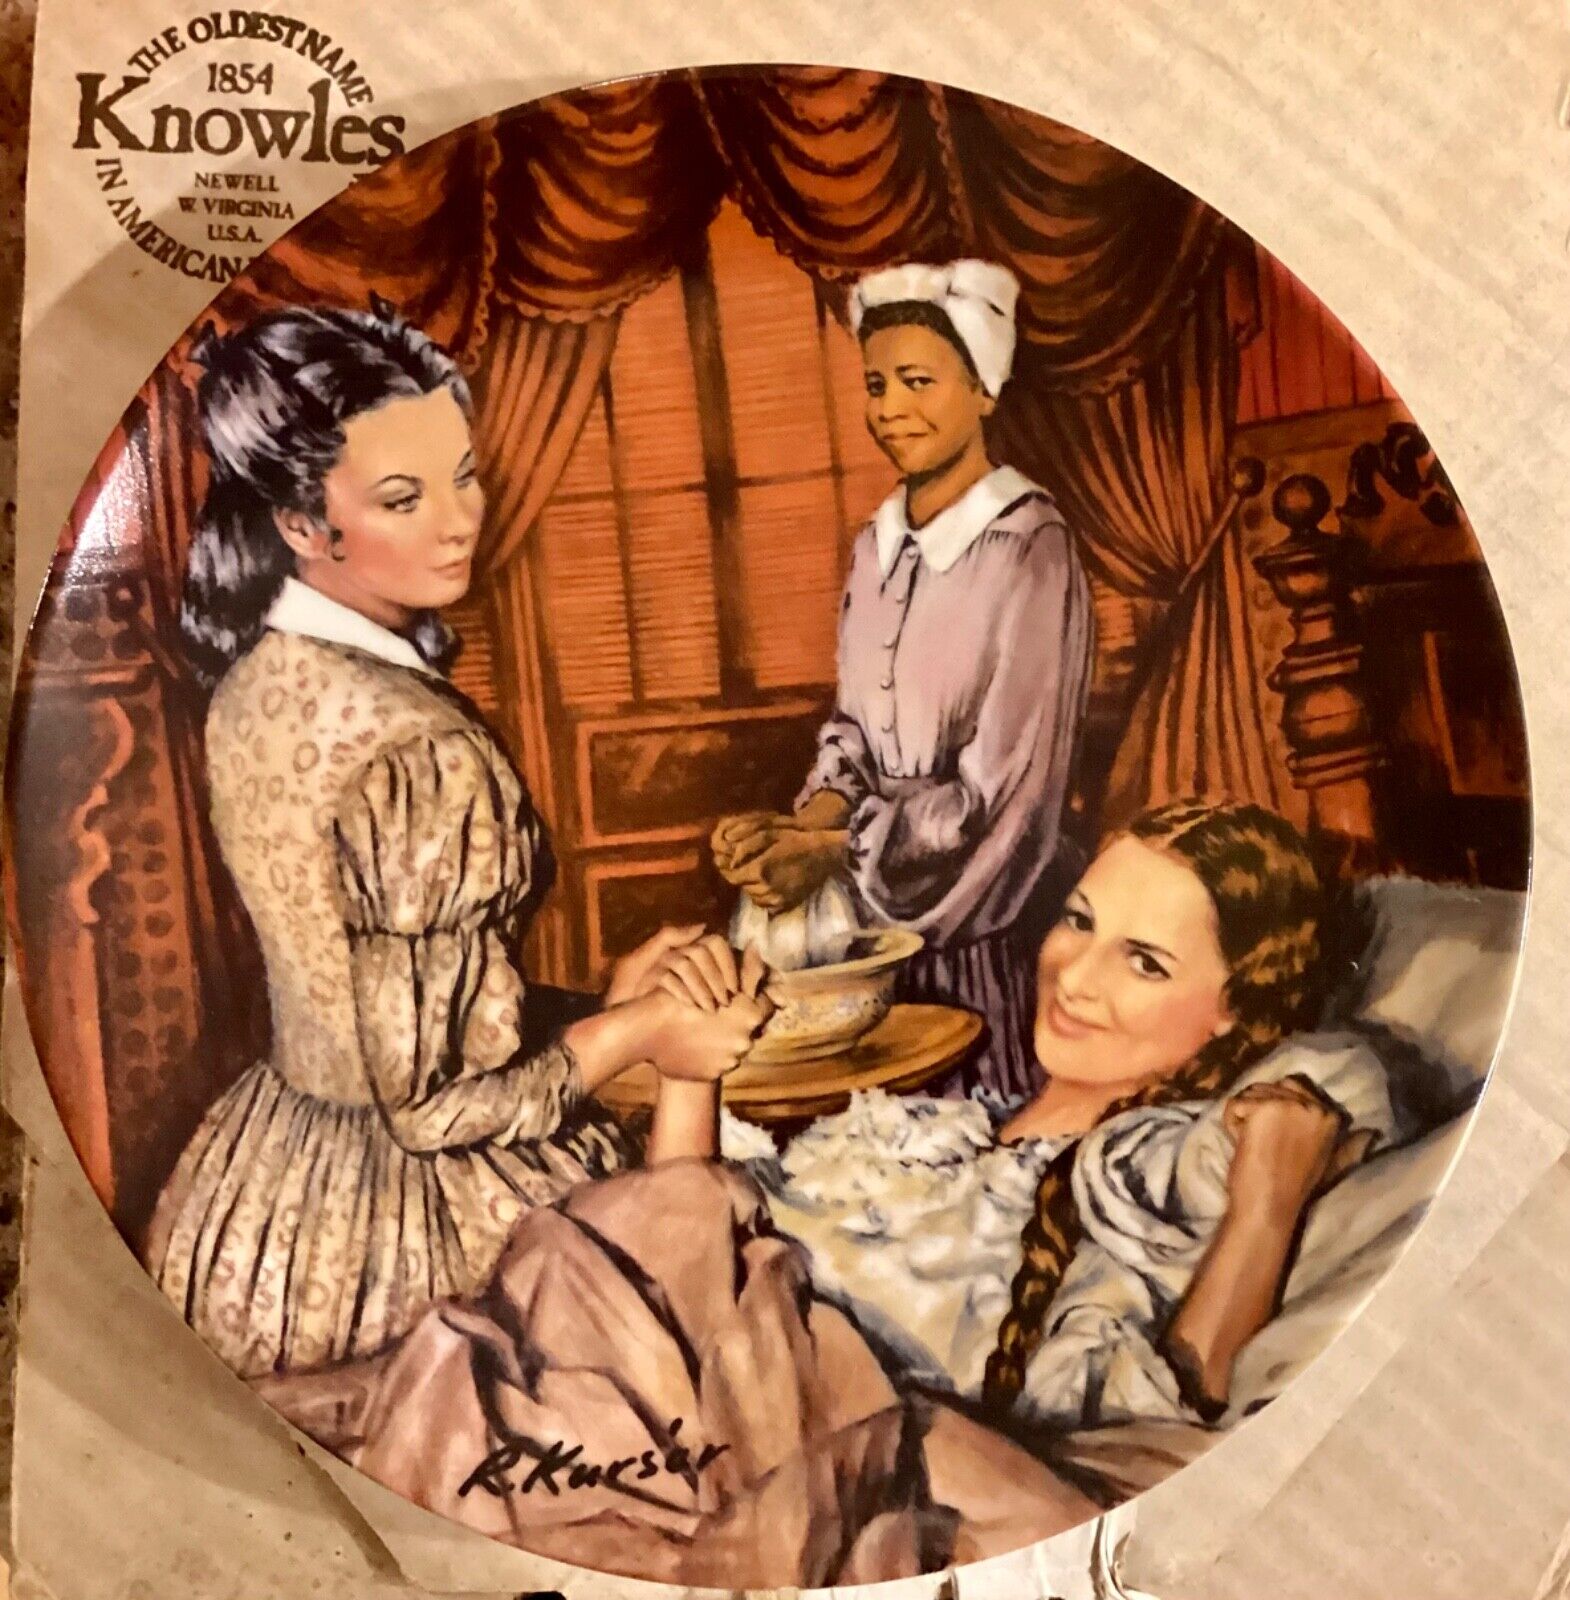 1983 Gone With The Wind “Melanie Gives Birth” plate with original box.